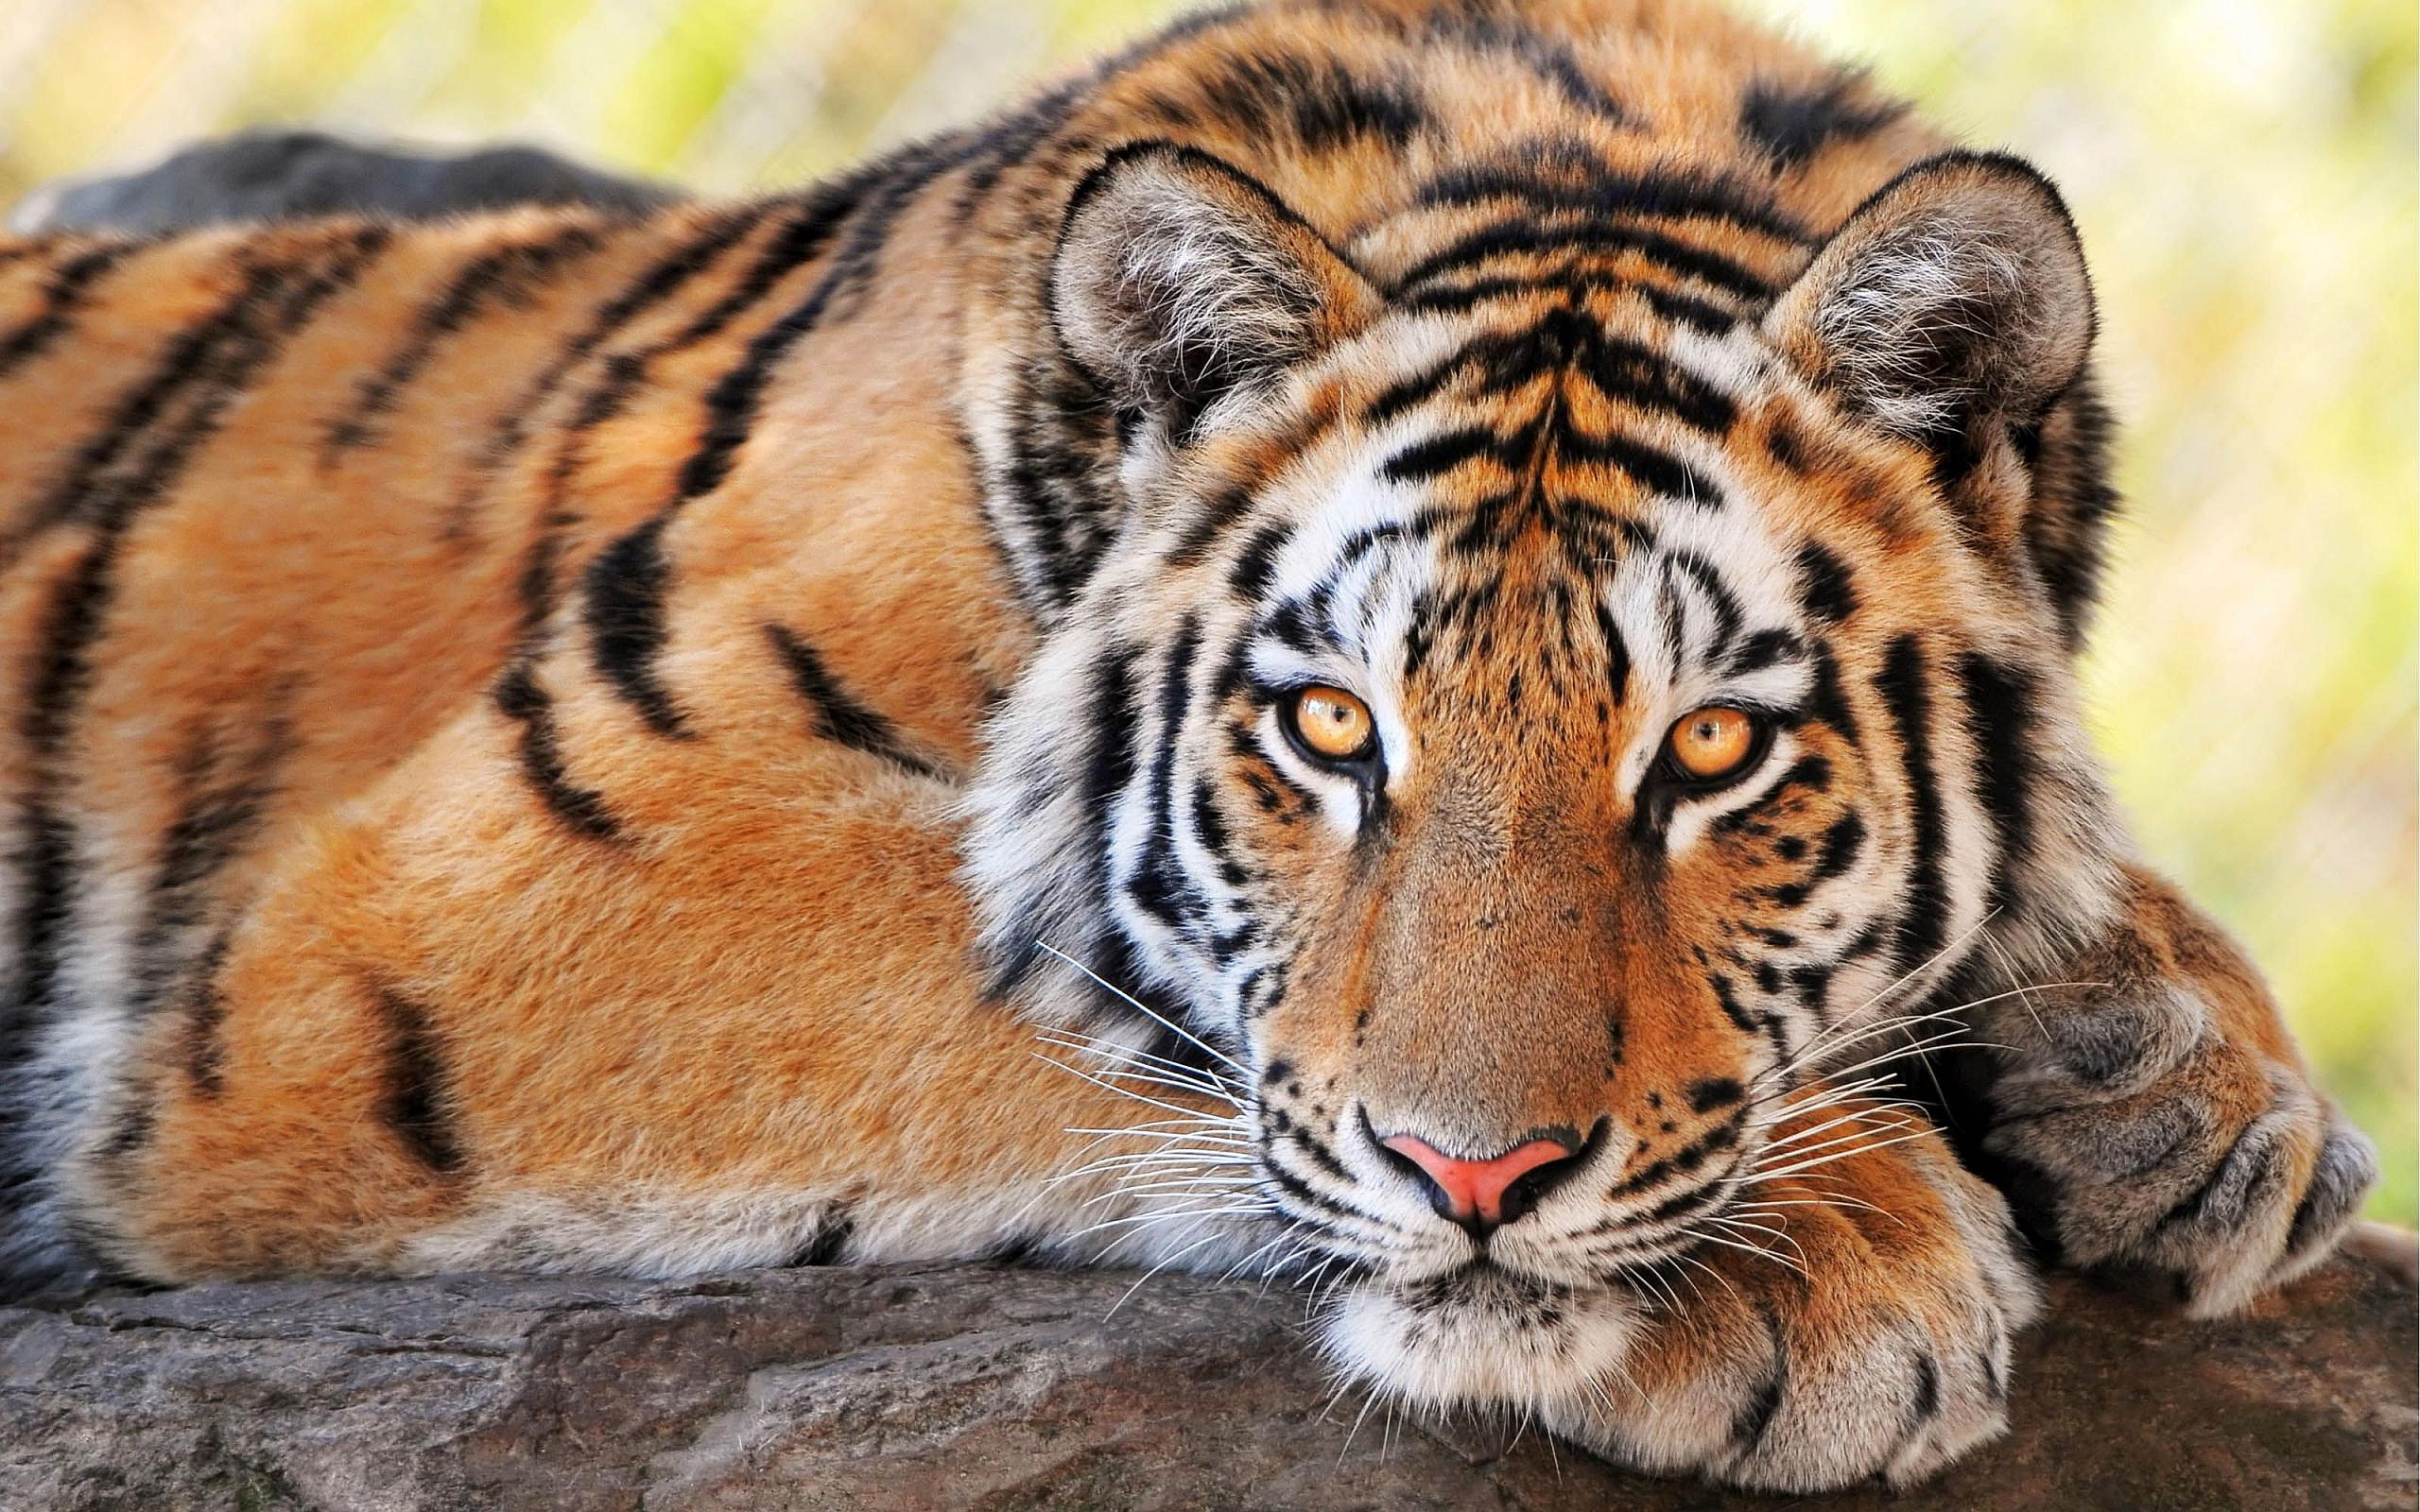 tiger facts and pictures download